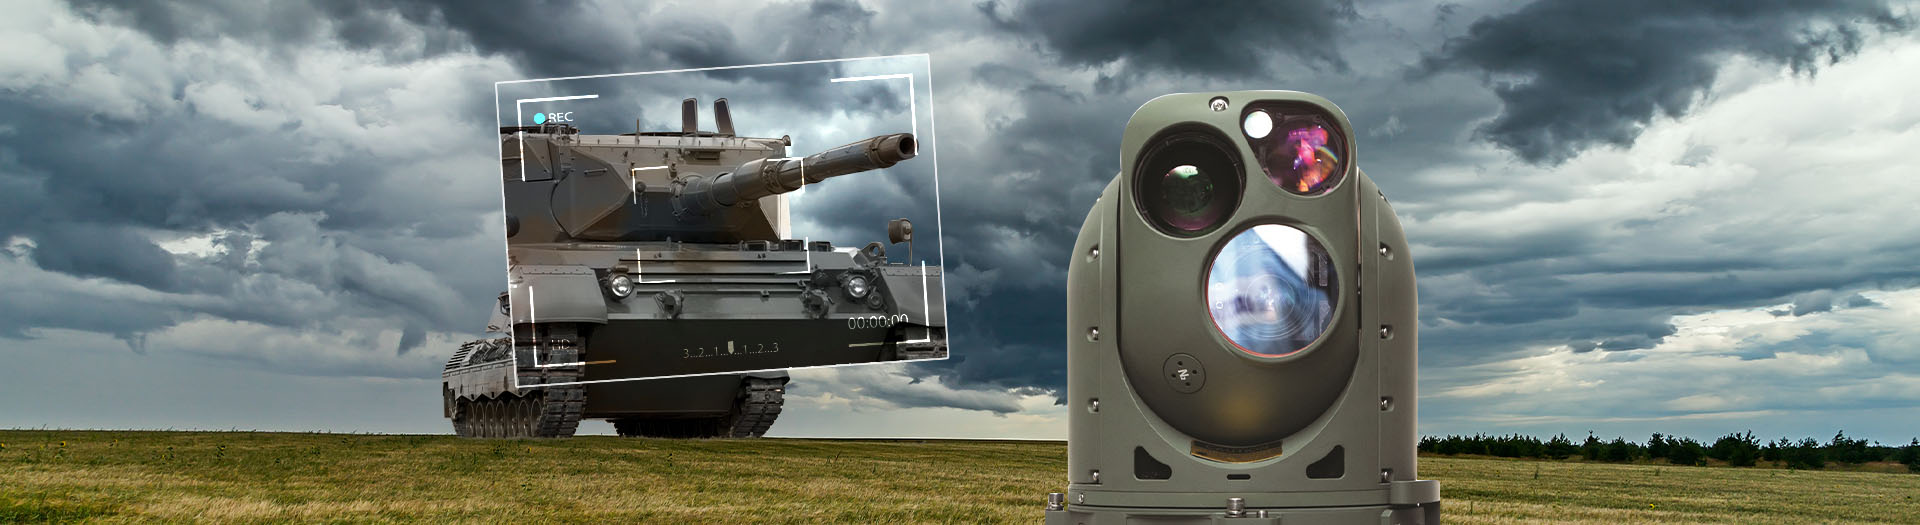 Land Minipop Day Night Observation System For Land Forces Applications Iai